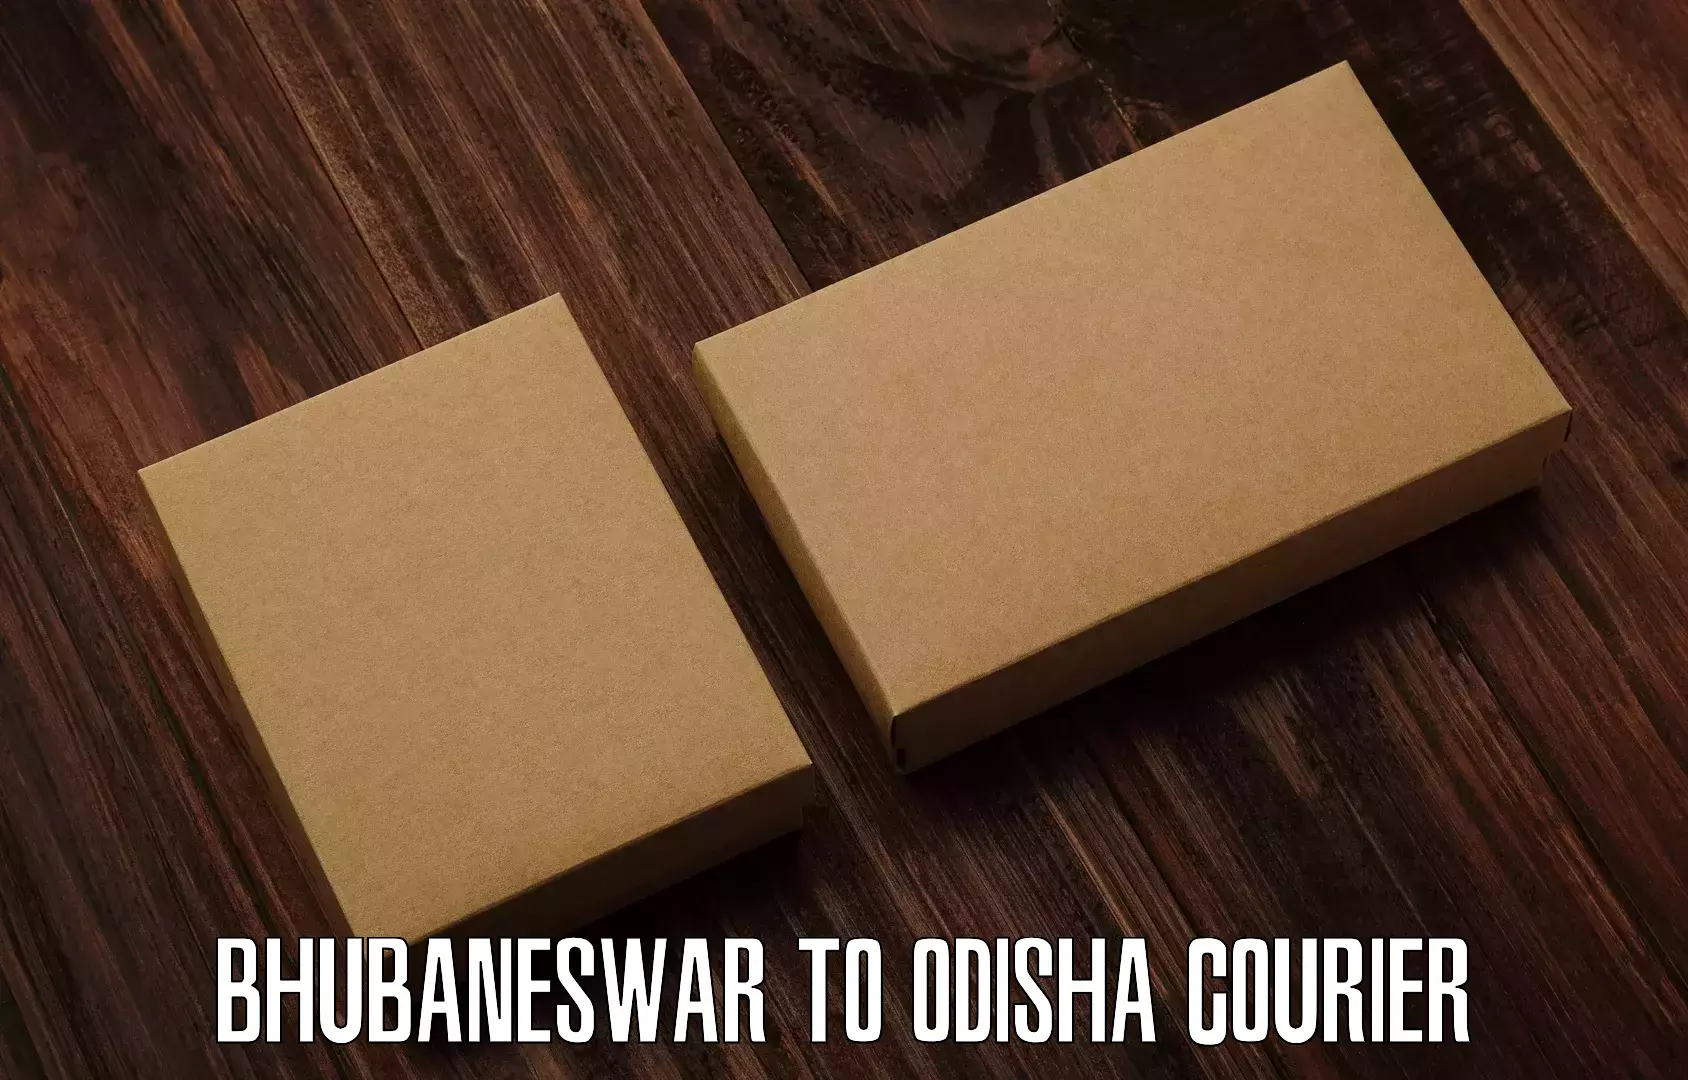 Customer-oriented courier services Bhubaneswar to Odisha